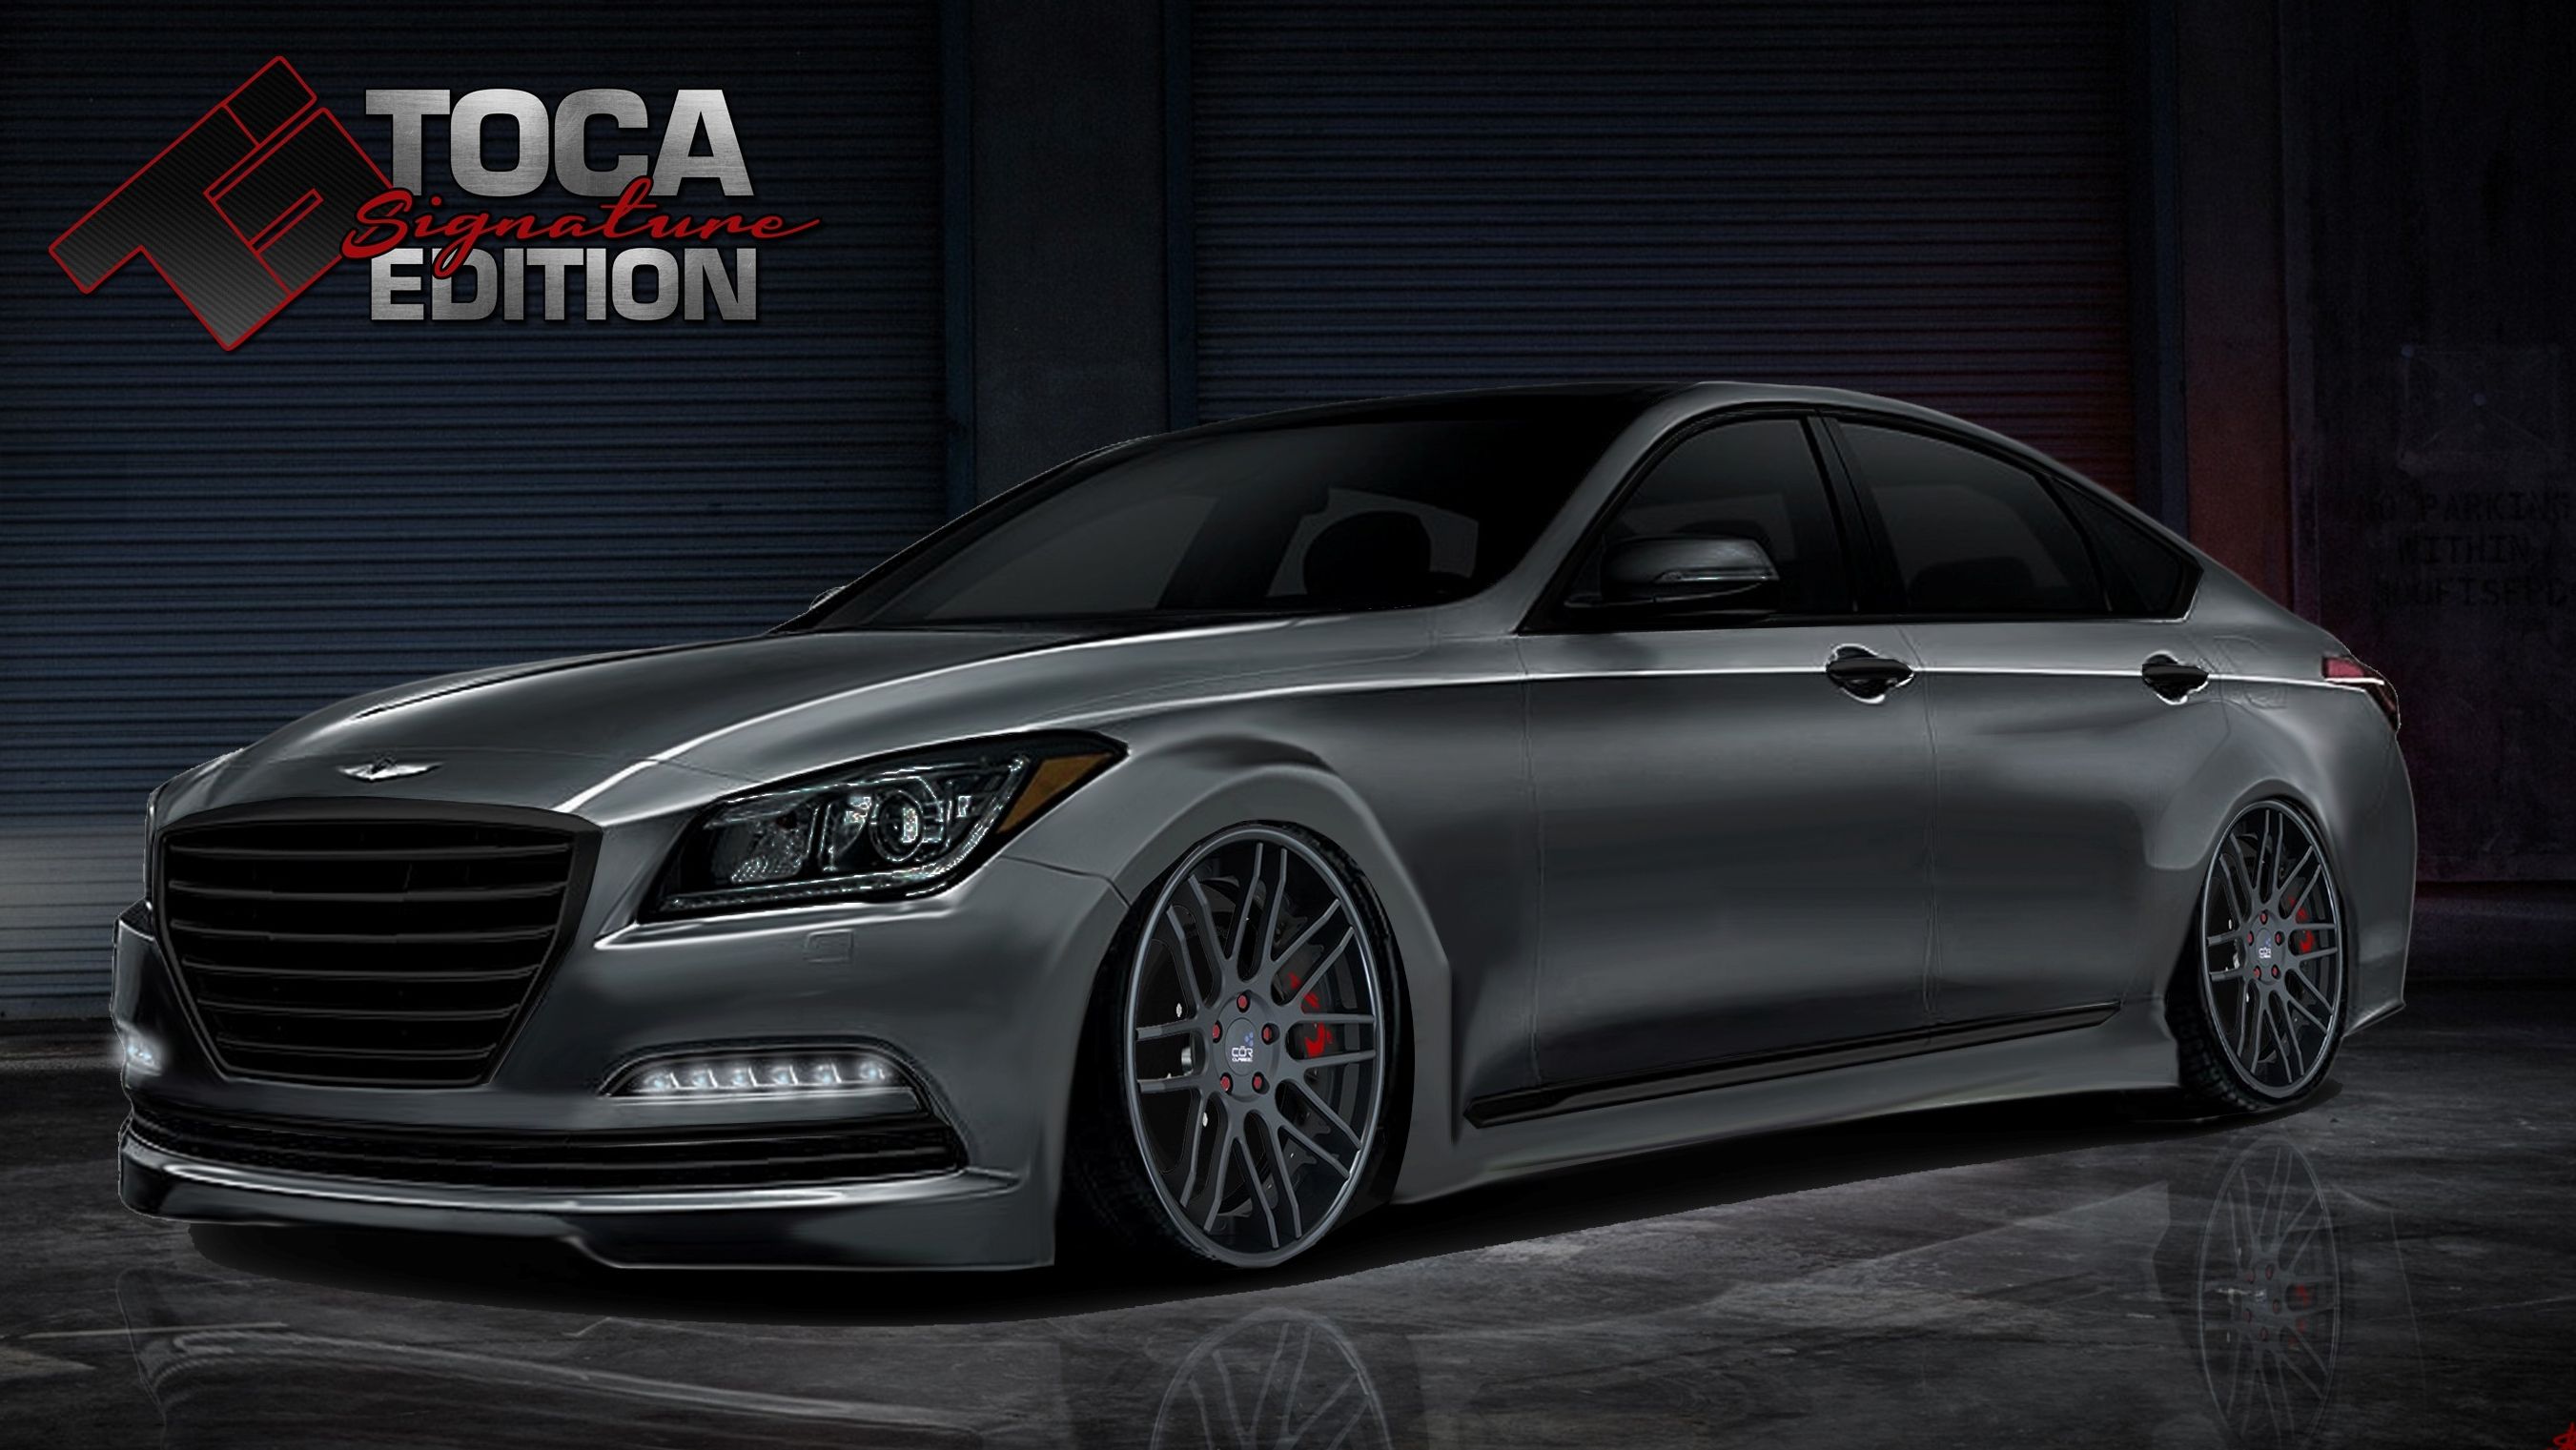  The Genesis will be present at SEMA wearing a 600-horsepower tuning kit from Toca Marketing Group.